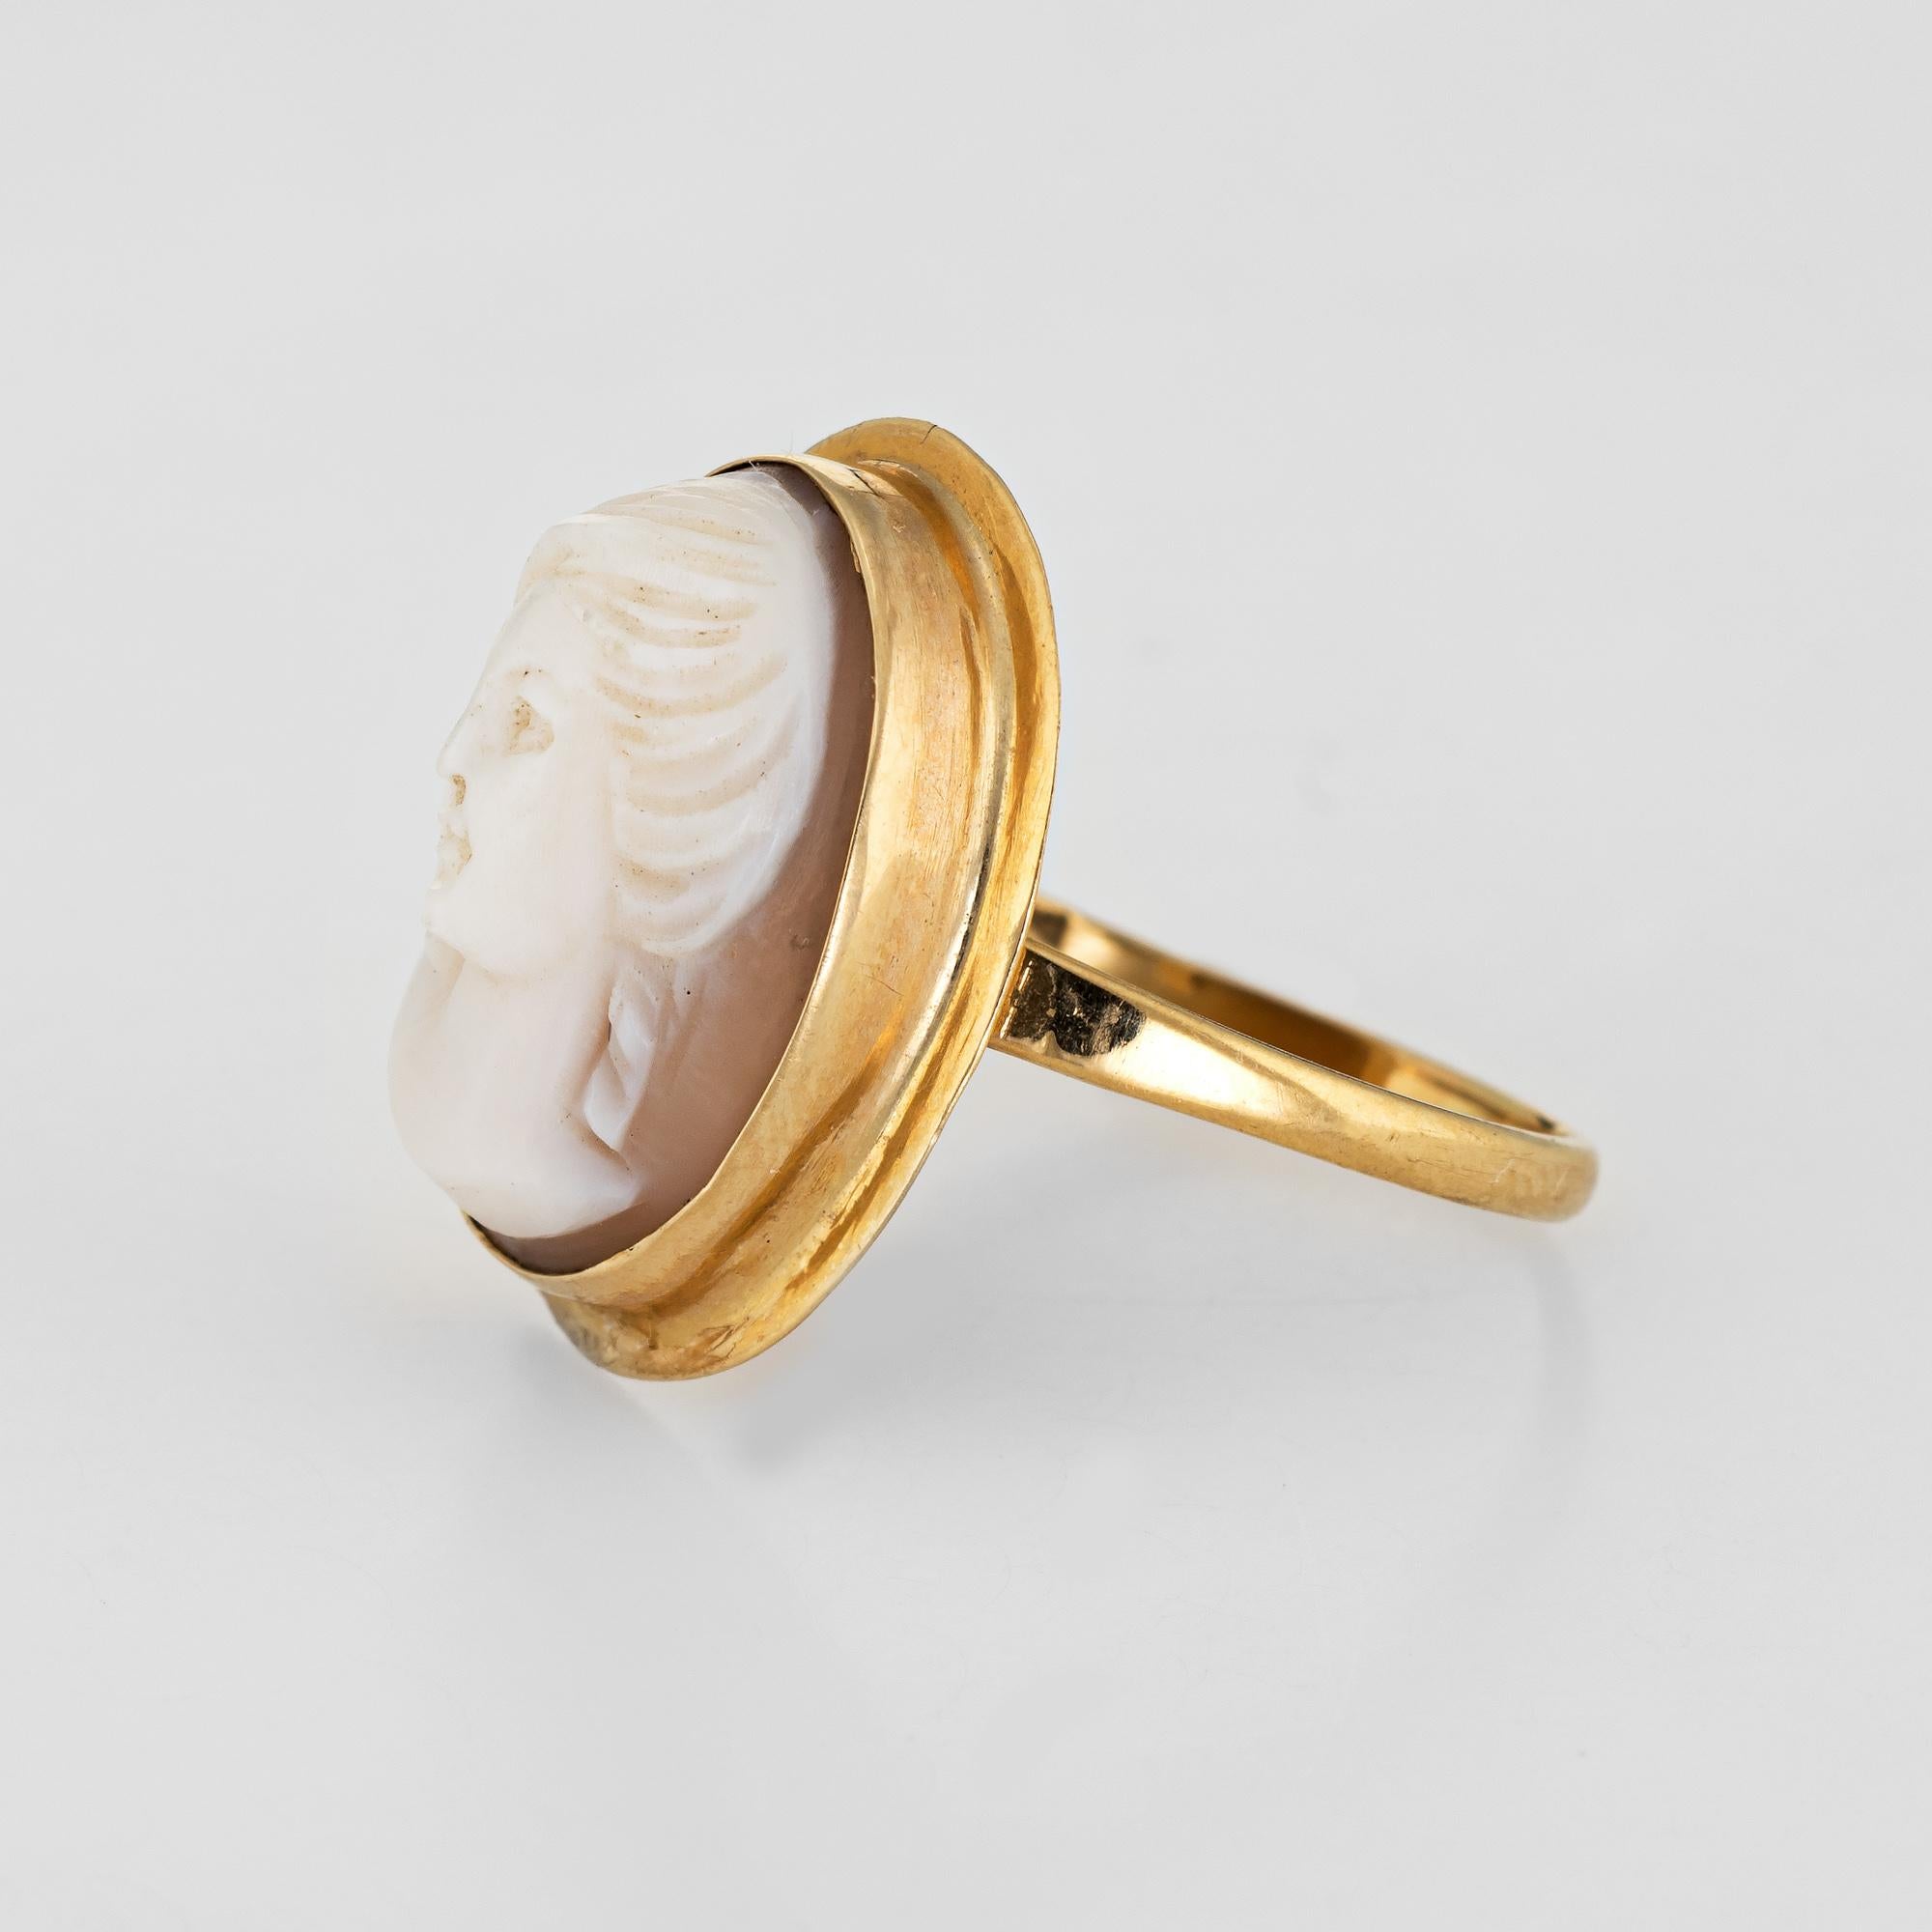 Women's Vintage Cameo Ring 18 Karat Yellow Gold Estate Fine Jewelry Oval High Relief